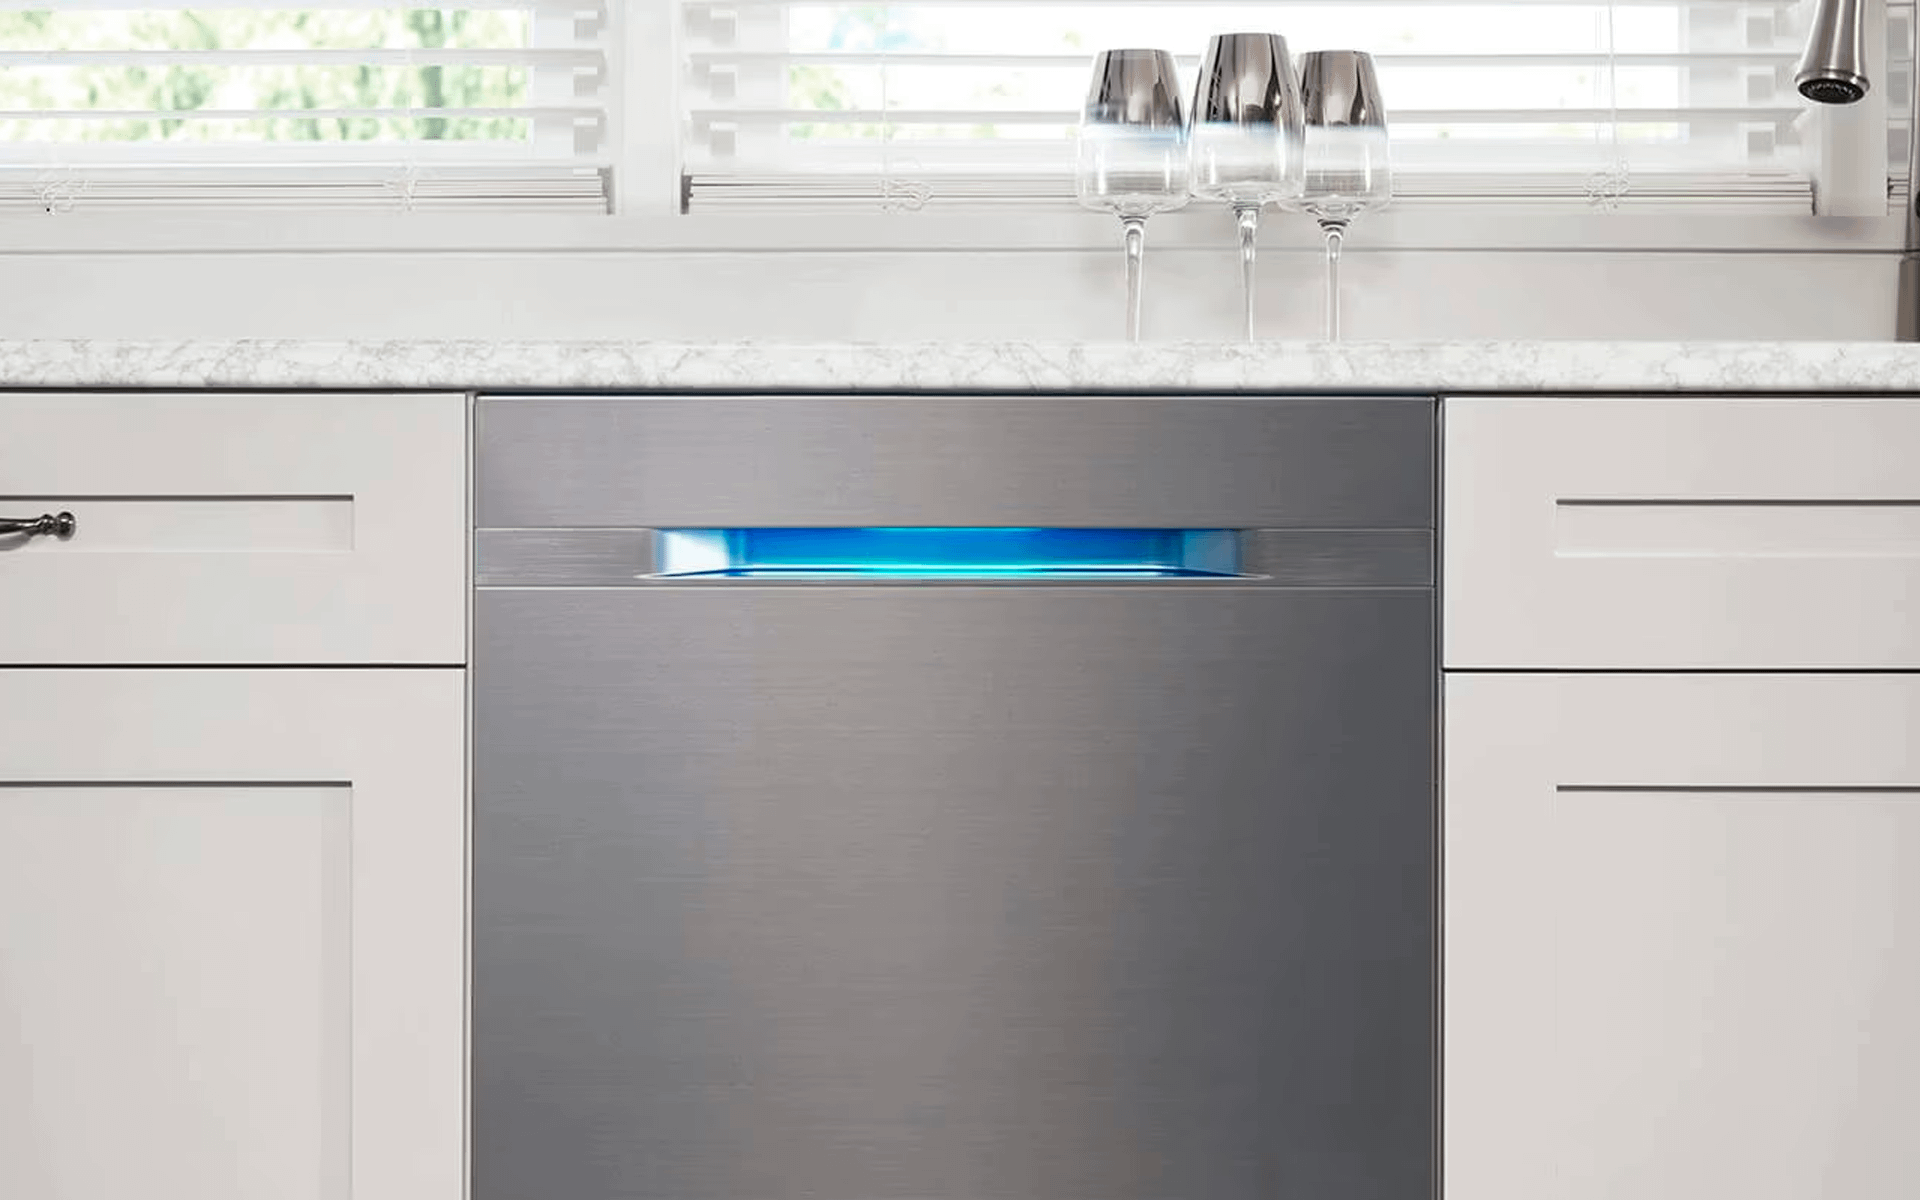 Built in Samsung dishwasher in white kitchen with blue glow from handle.